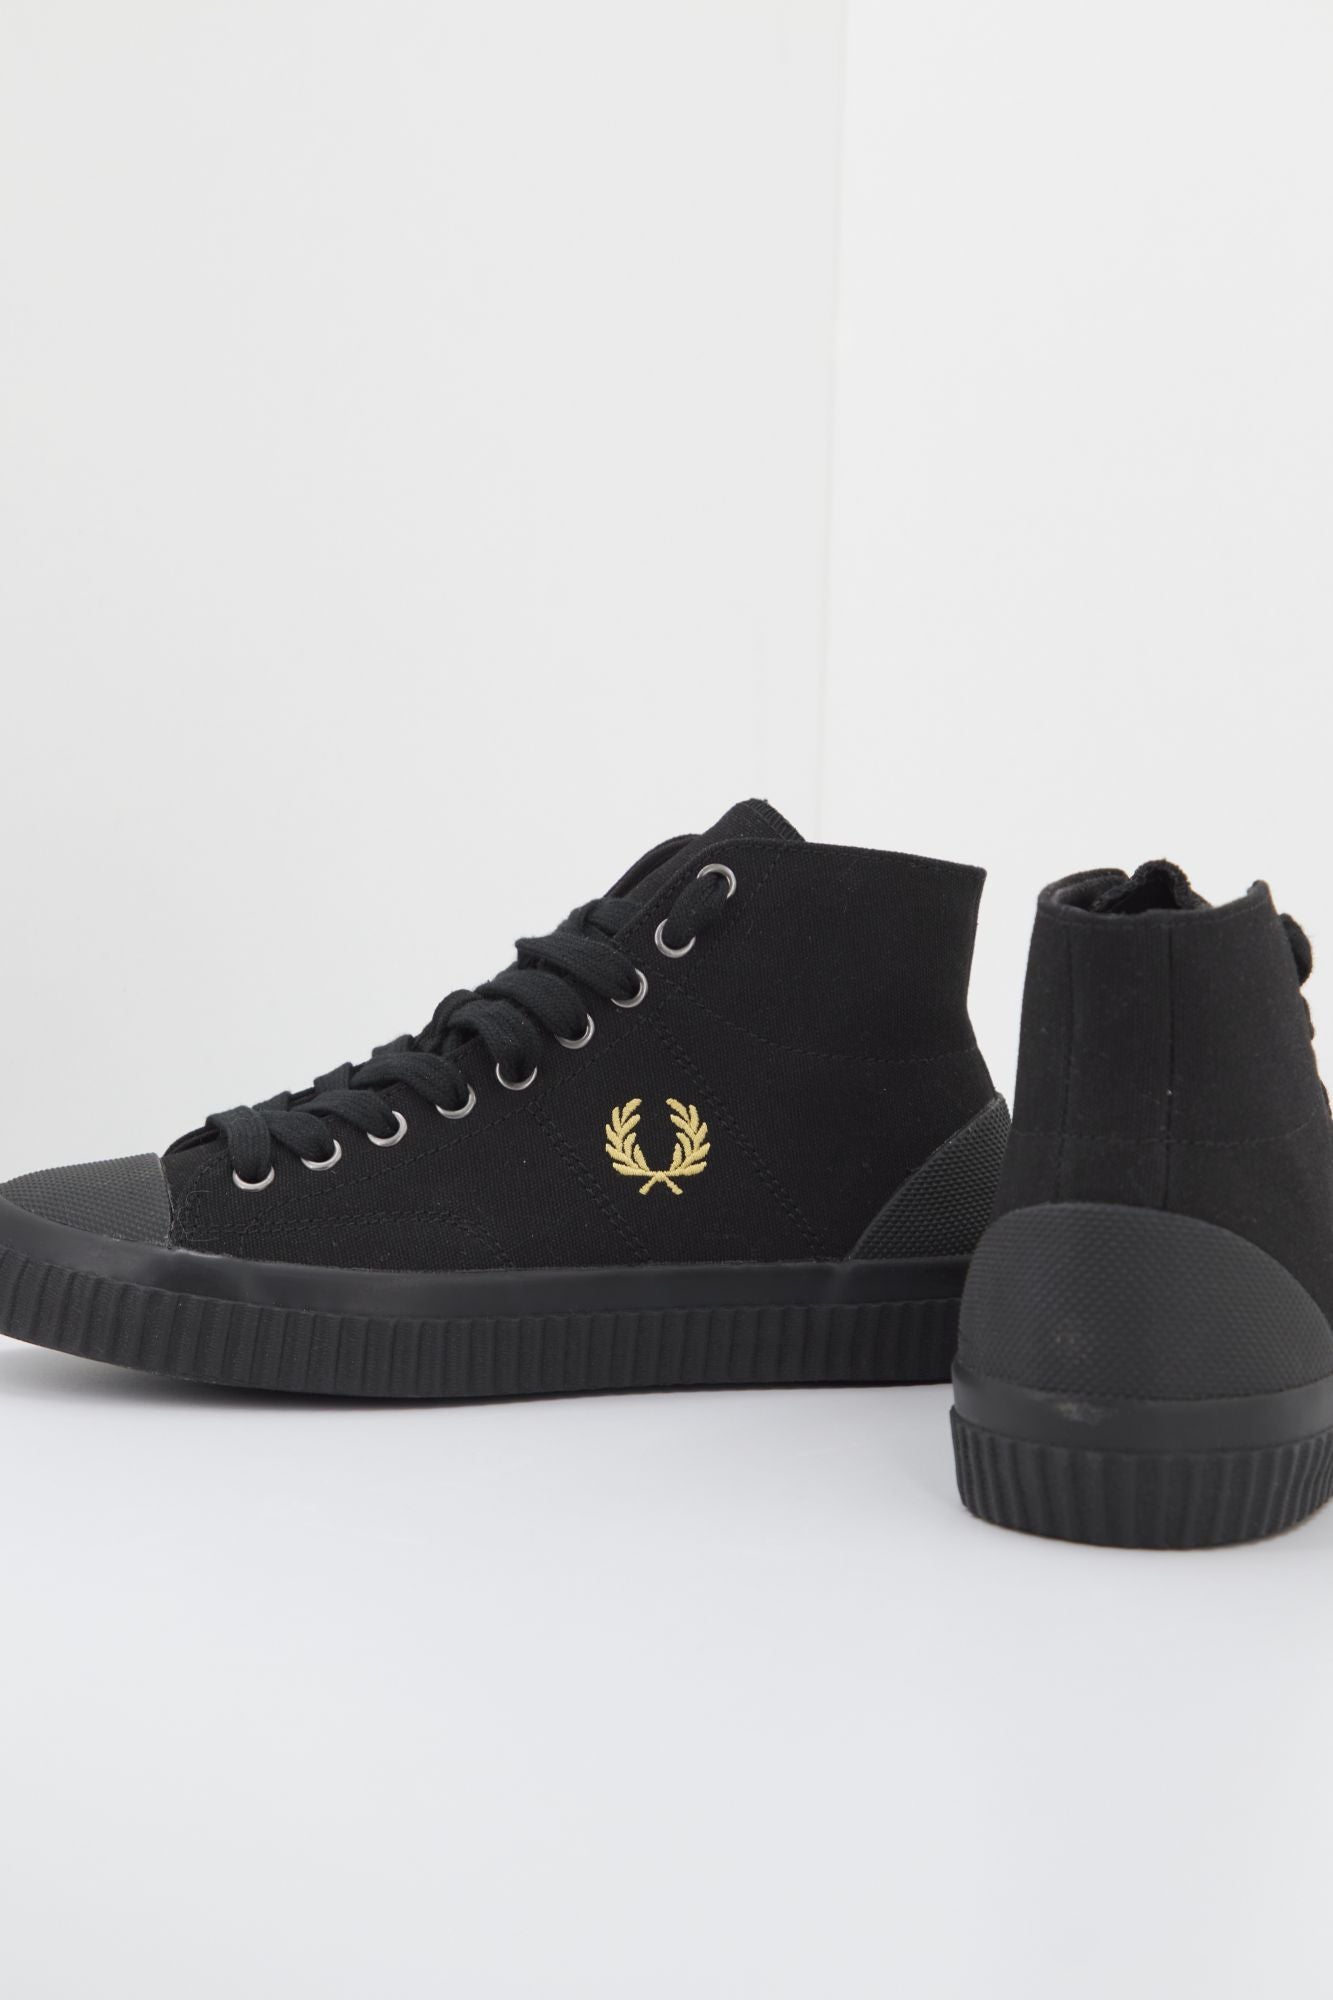 FRED PERRY B8110 en color NEGRO (3)